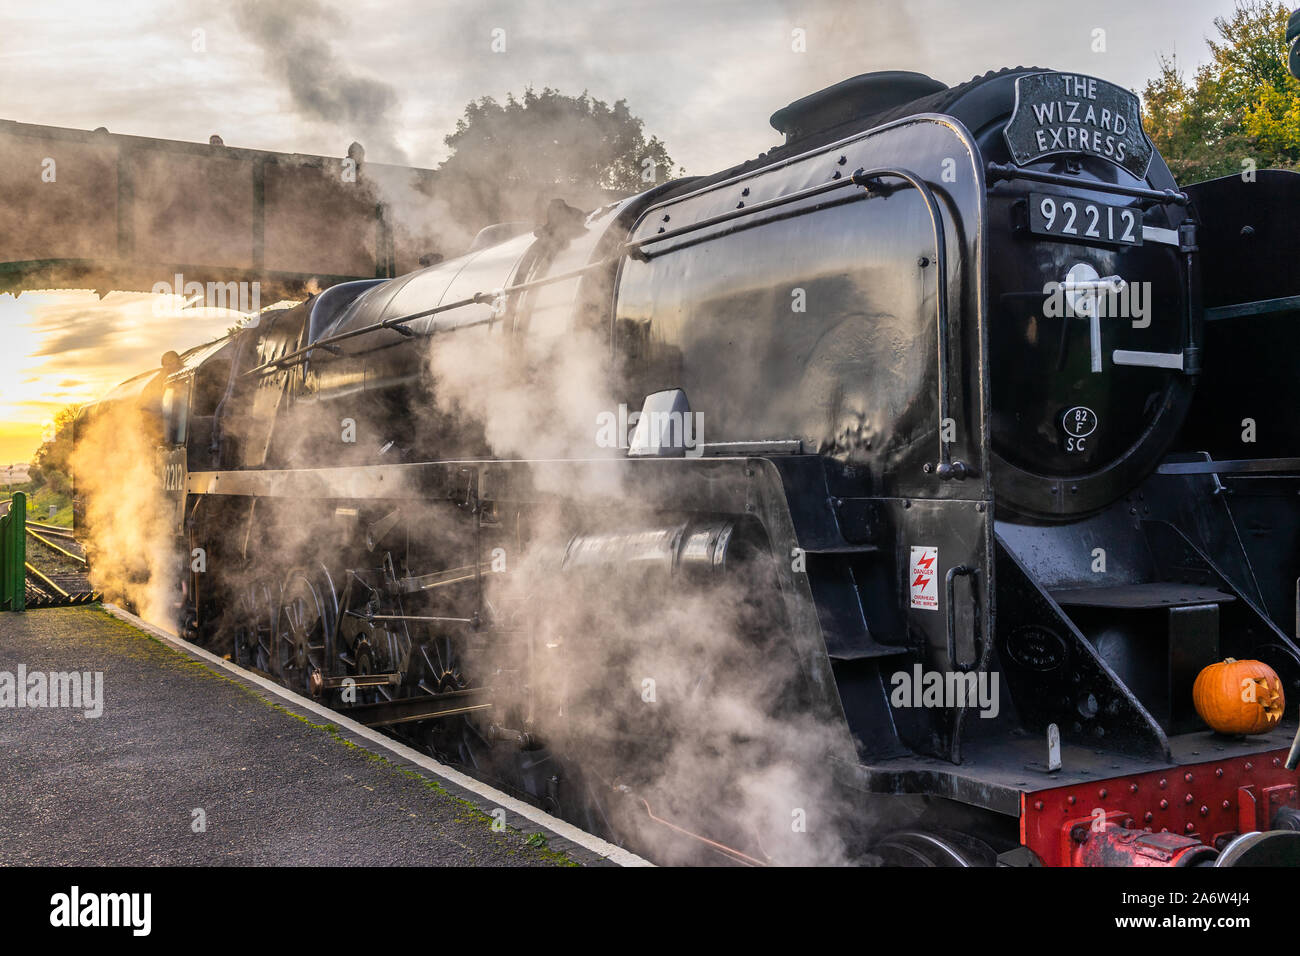 The Wizard Express Steam Locomotive 92212 at Ropley station, Watercress Line, Ropley, Hampshire Stock Photo